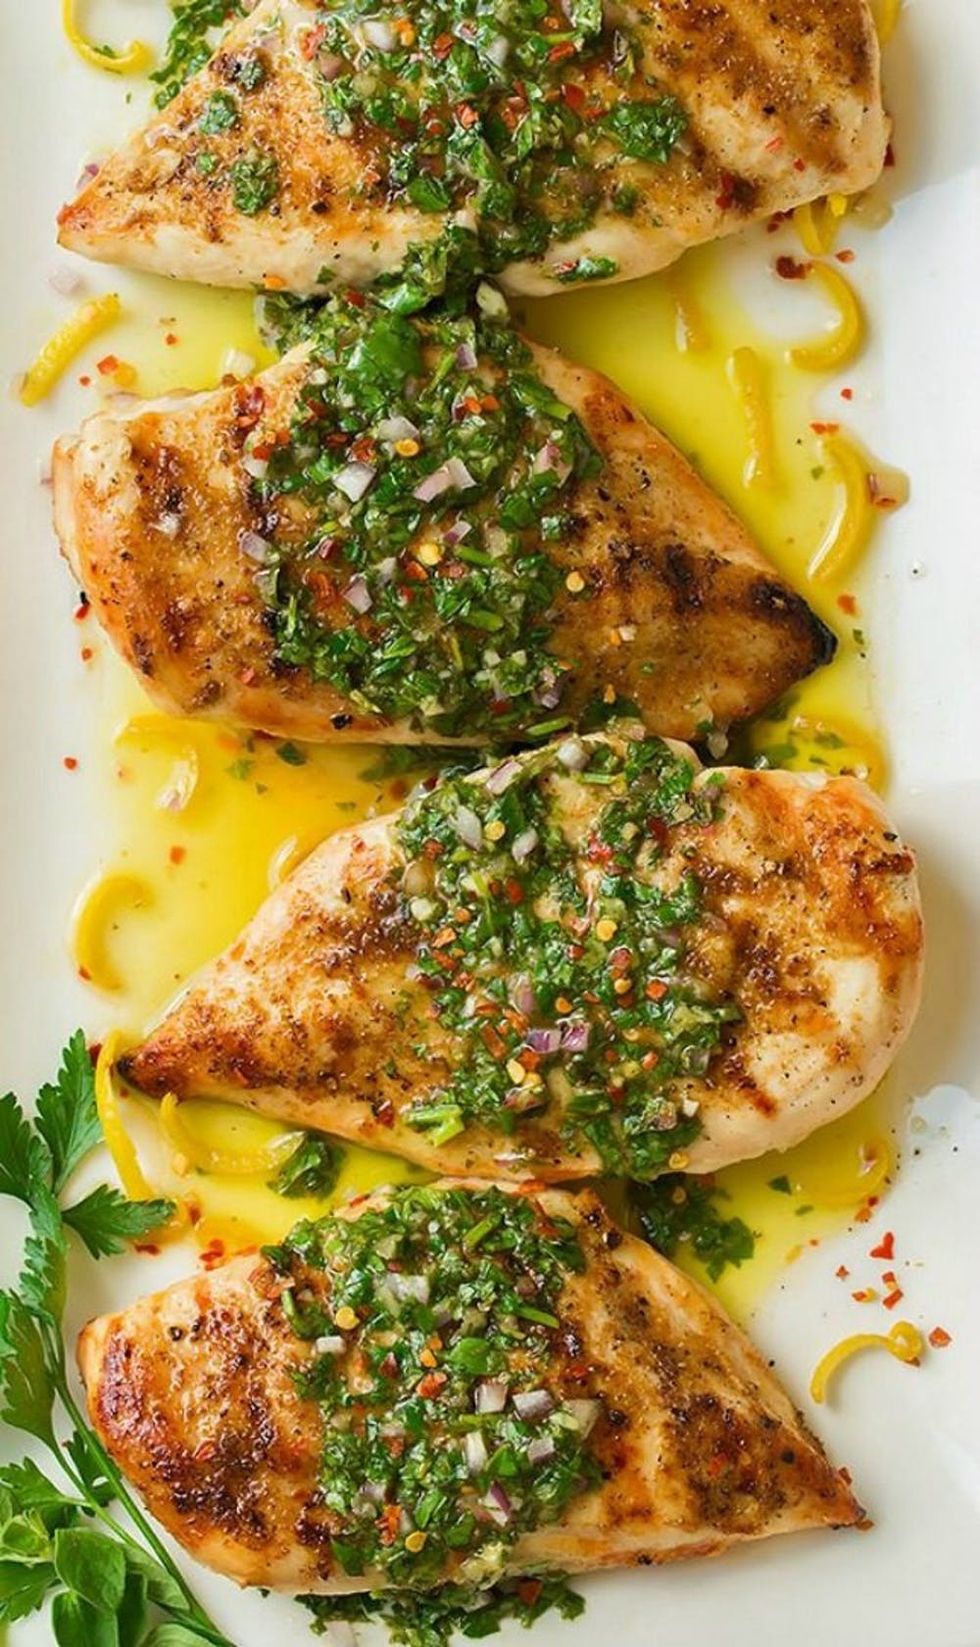 15 Times Chimichurri Spiced Up Your Dinner - Brit + Co